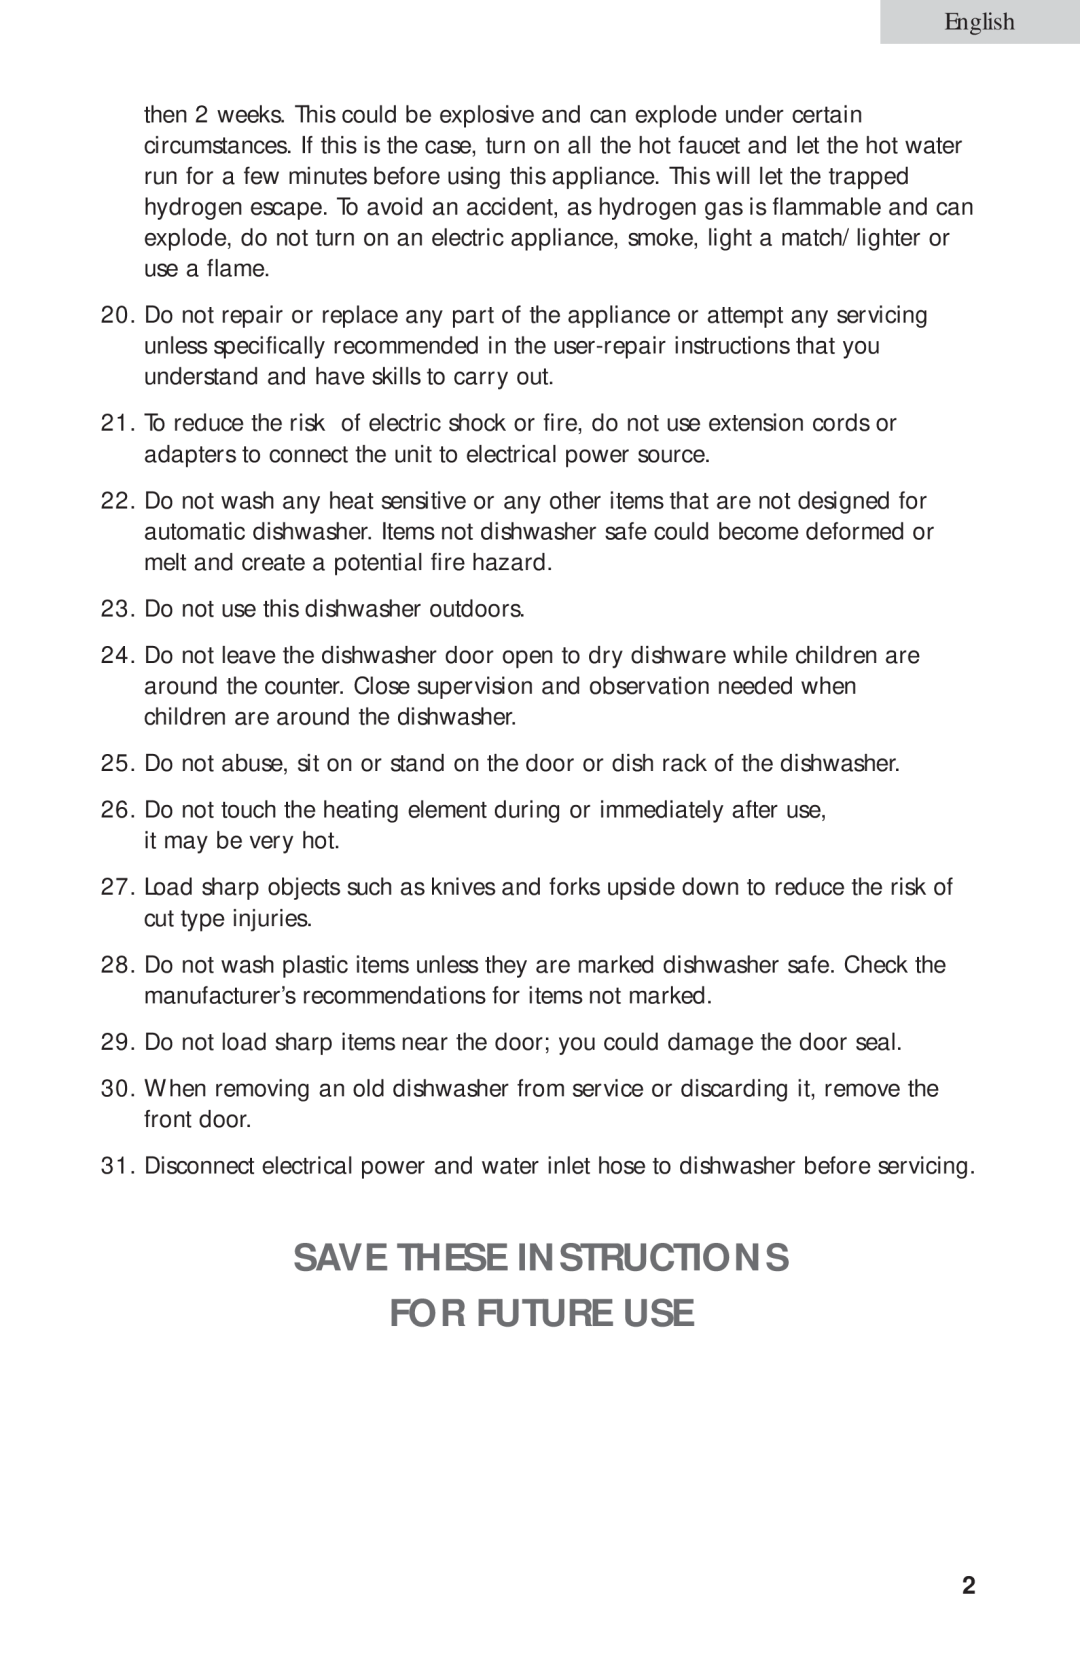 Haier HDB24VA user manual Save These Instructions For Future Use, English 